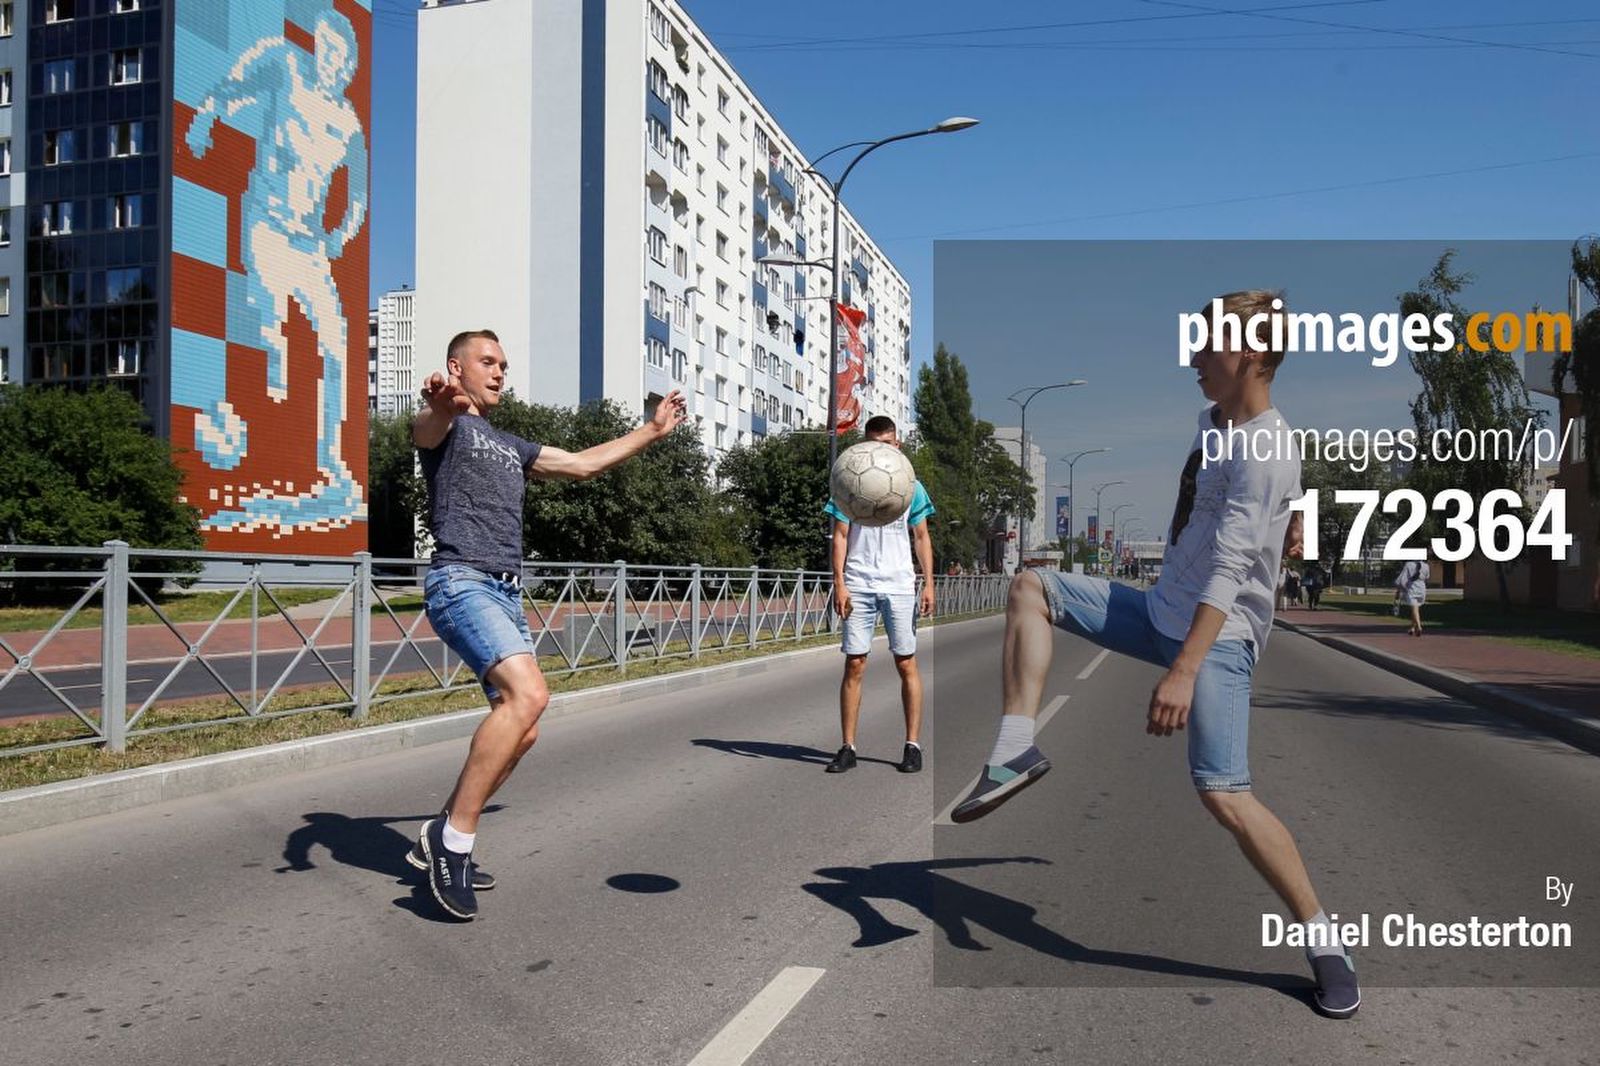 Young Russians play football near the stadium